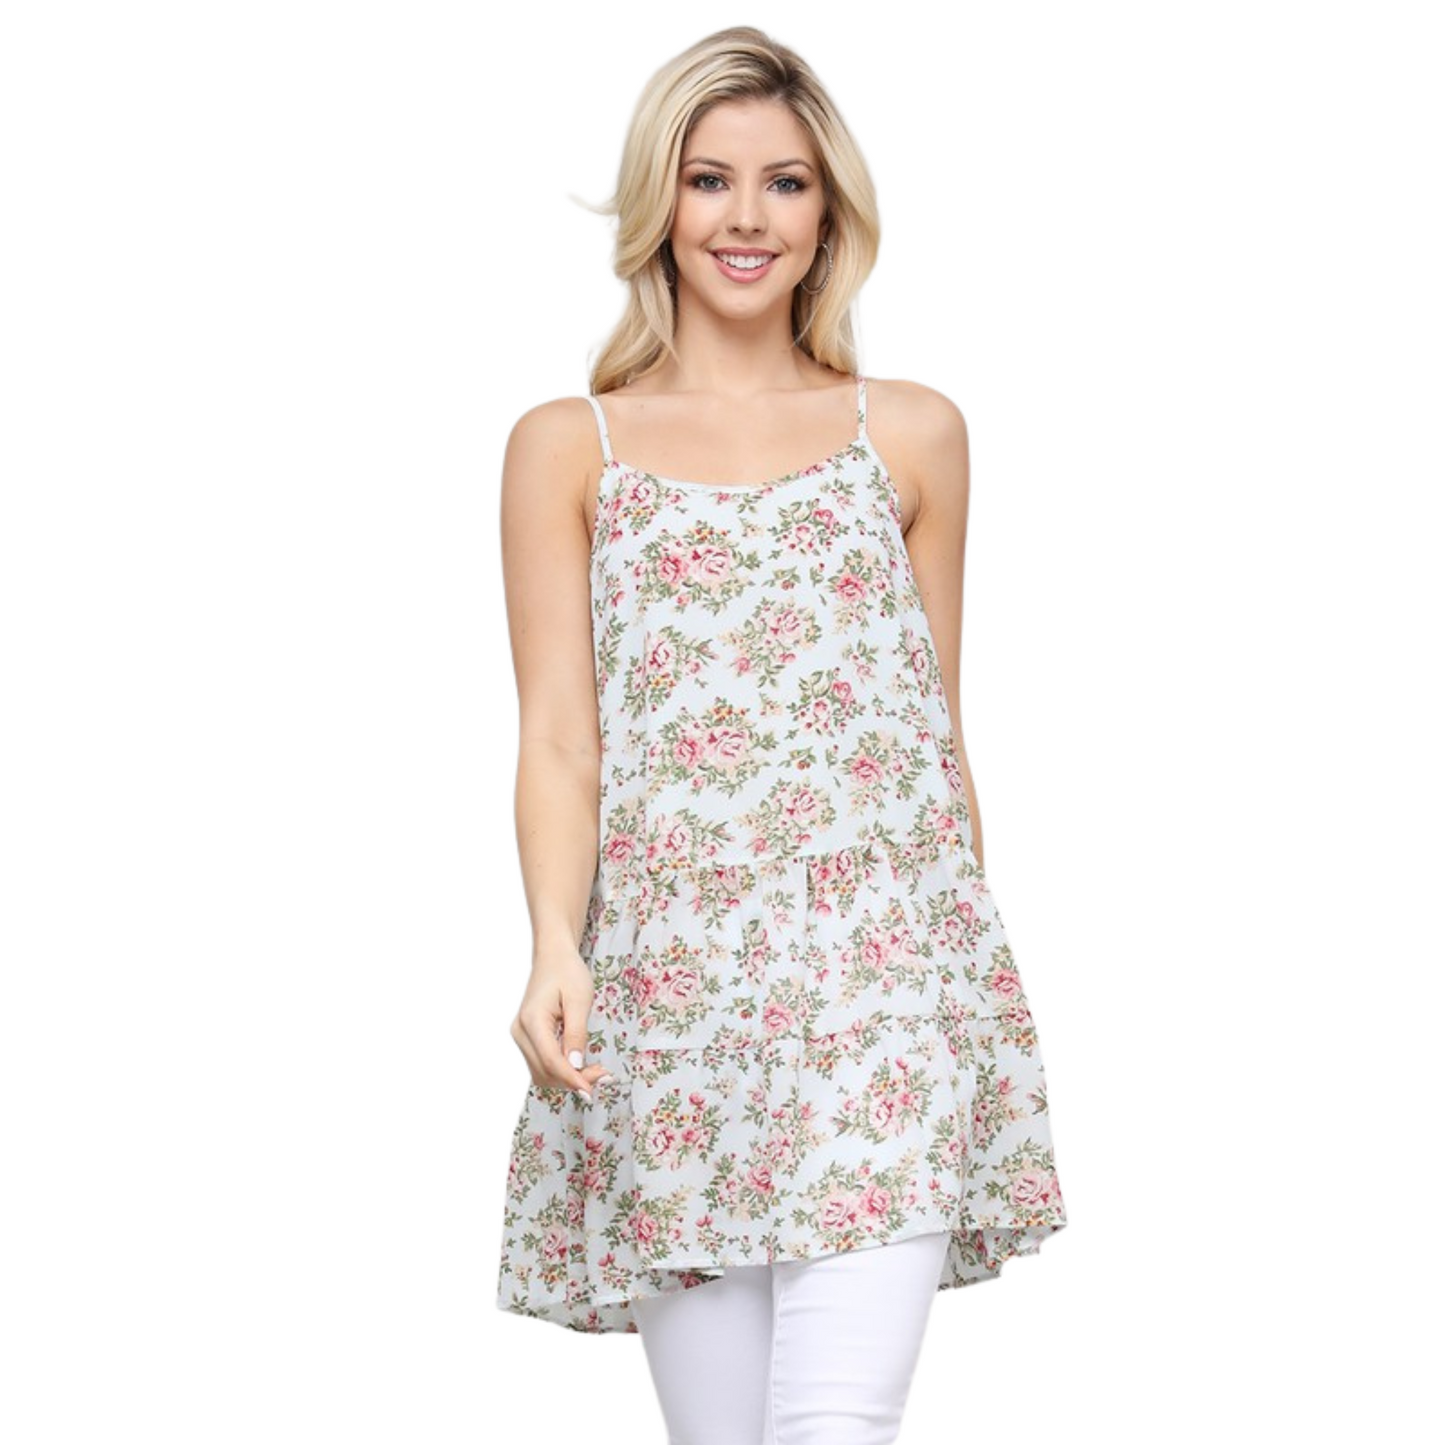 Ninexis Ruffled Floral Tank Top (2 Colors S-XL)